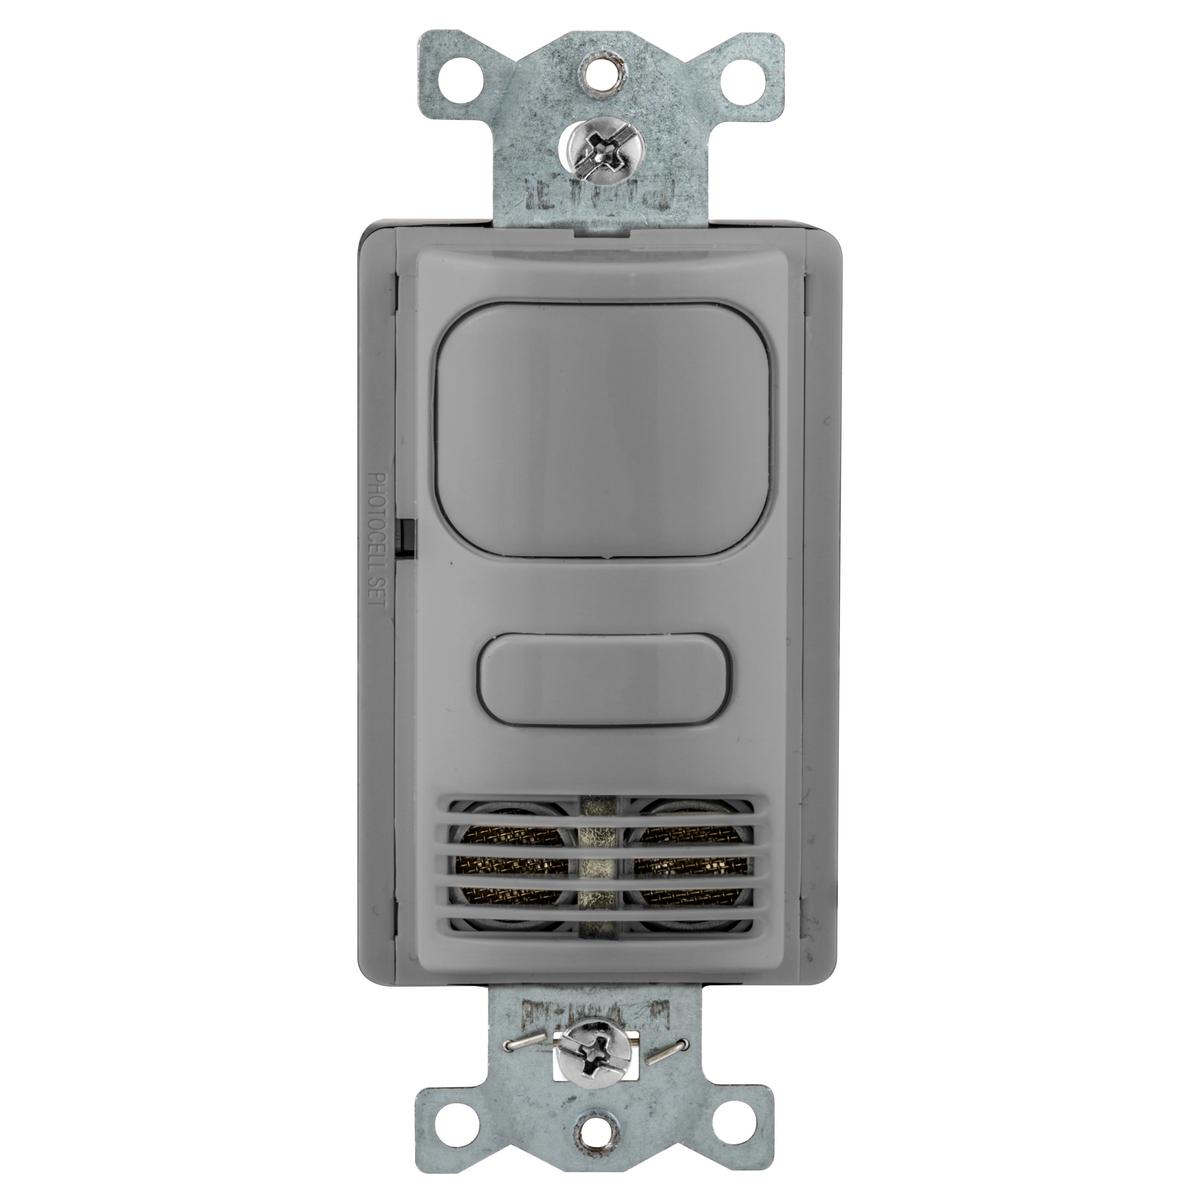 Hubbell AD2241GY1 Vacancy Sensors, Wall Switch, AdaptiveDual Technology, 1 Circuit, 24V DC, Gray 